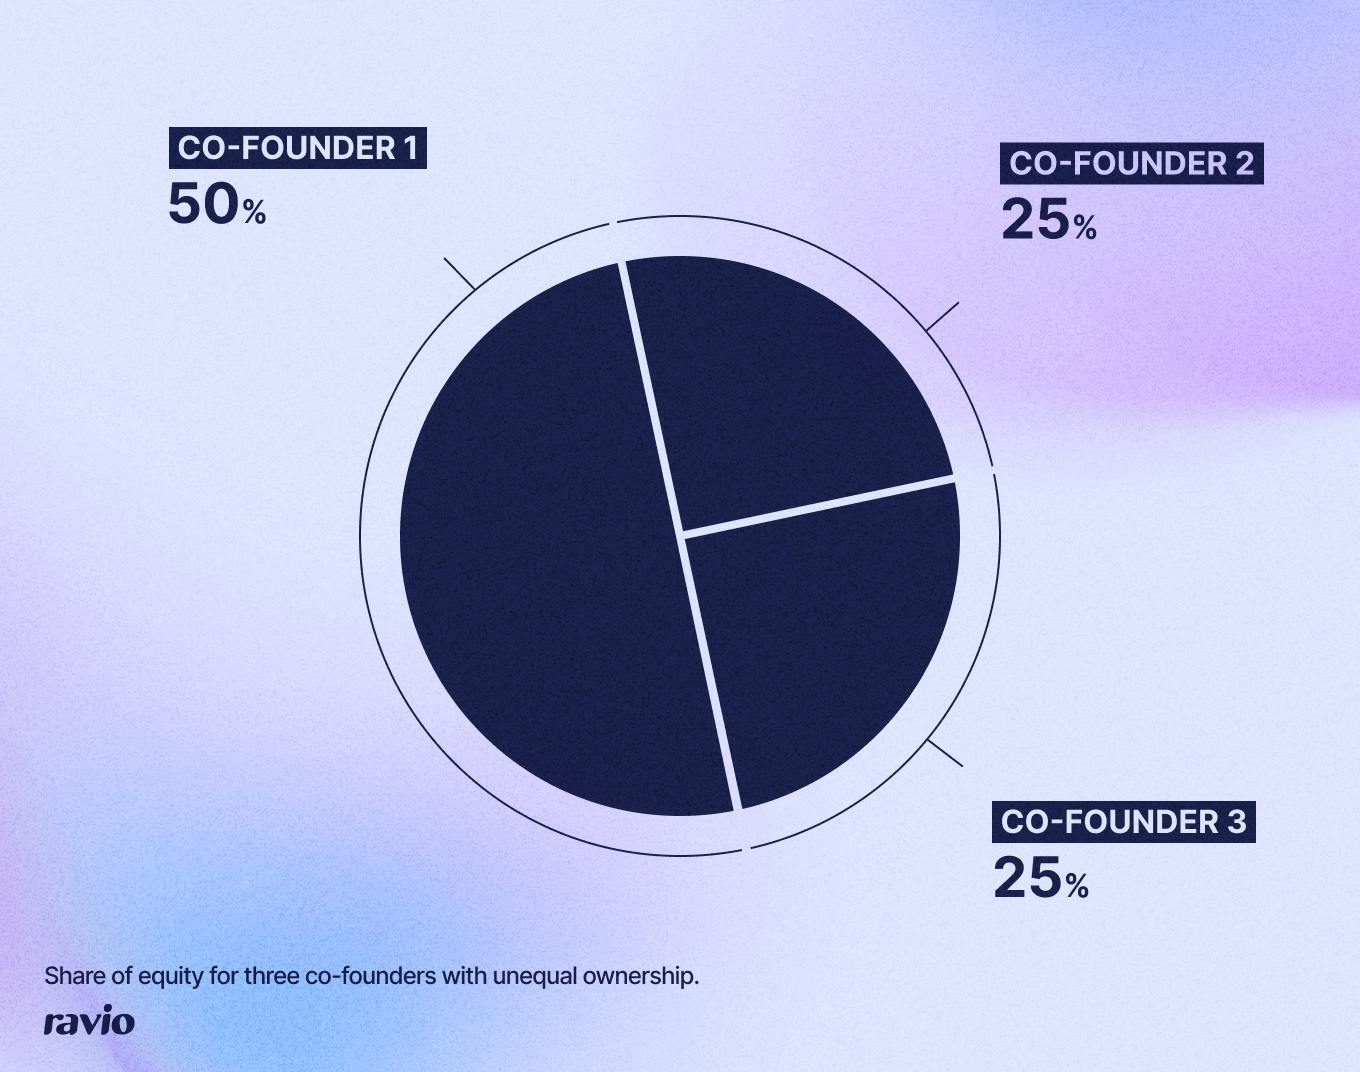 Pie chart showing 50% equity owned by one co-founder and 25% each for the other two co-founders (unequal equity split)